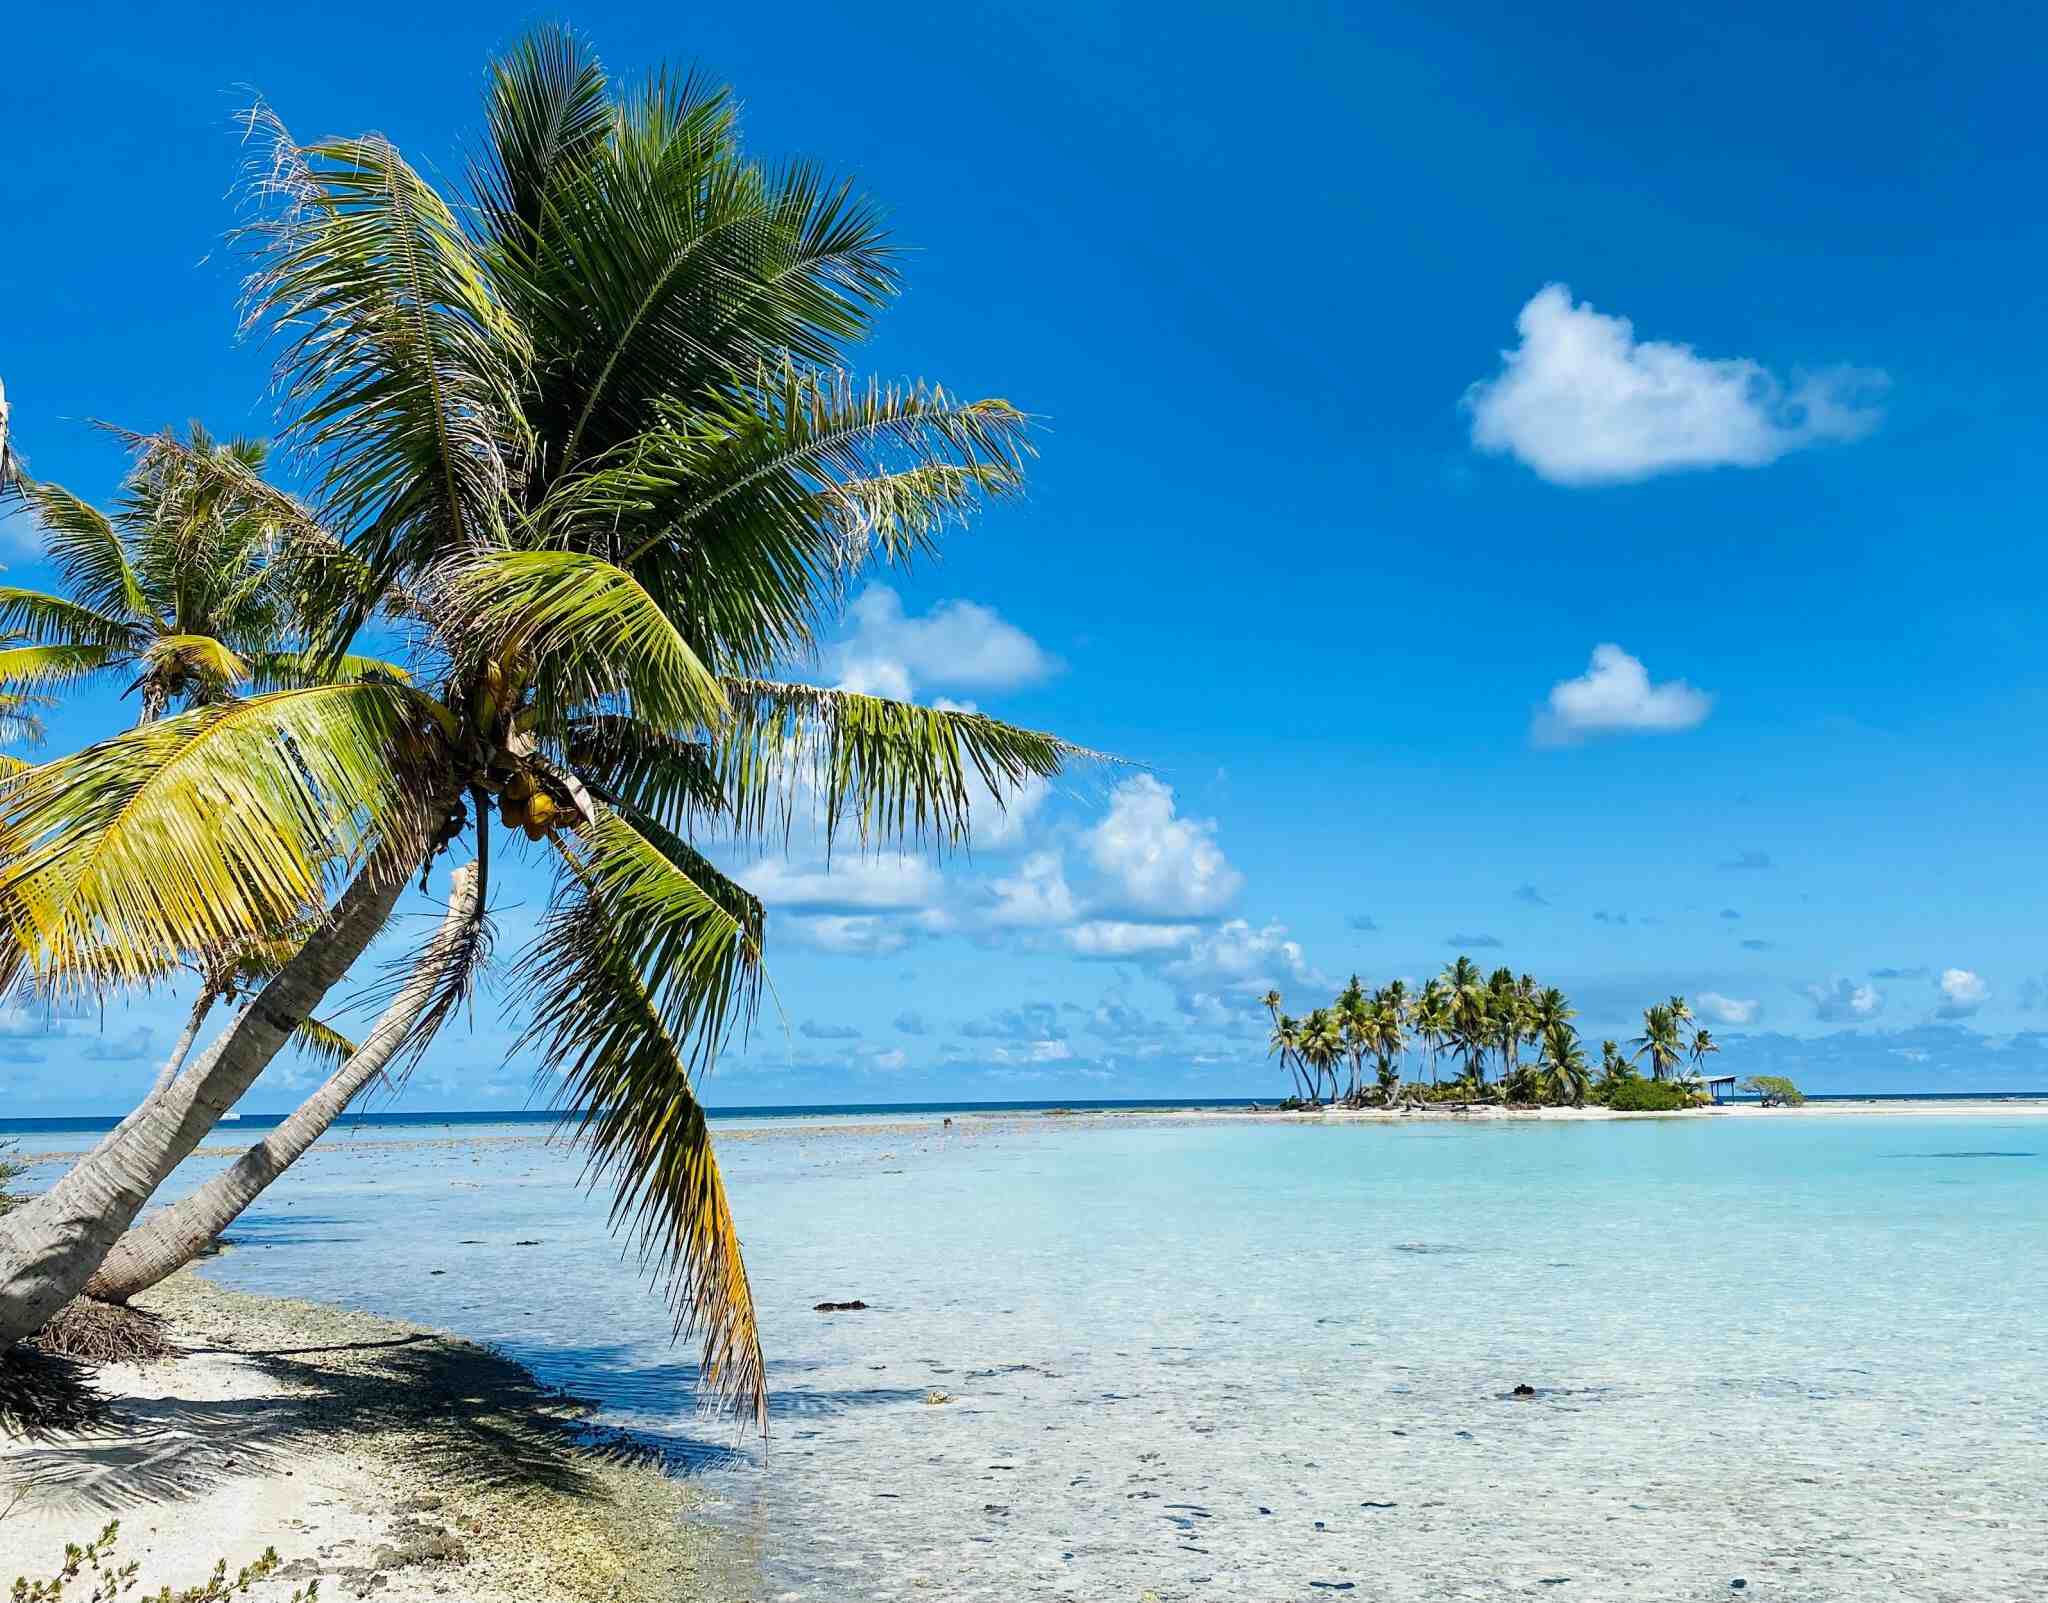 What is the temperature of the water in Bora Bora?